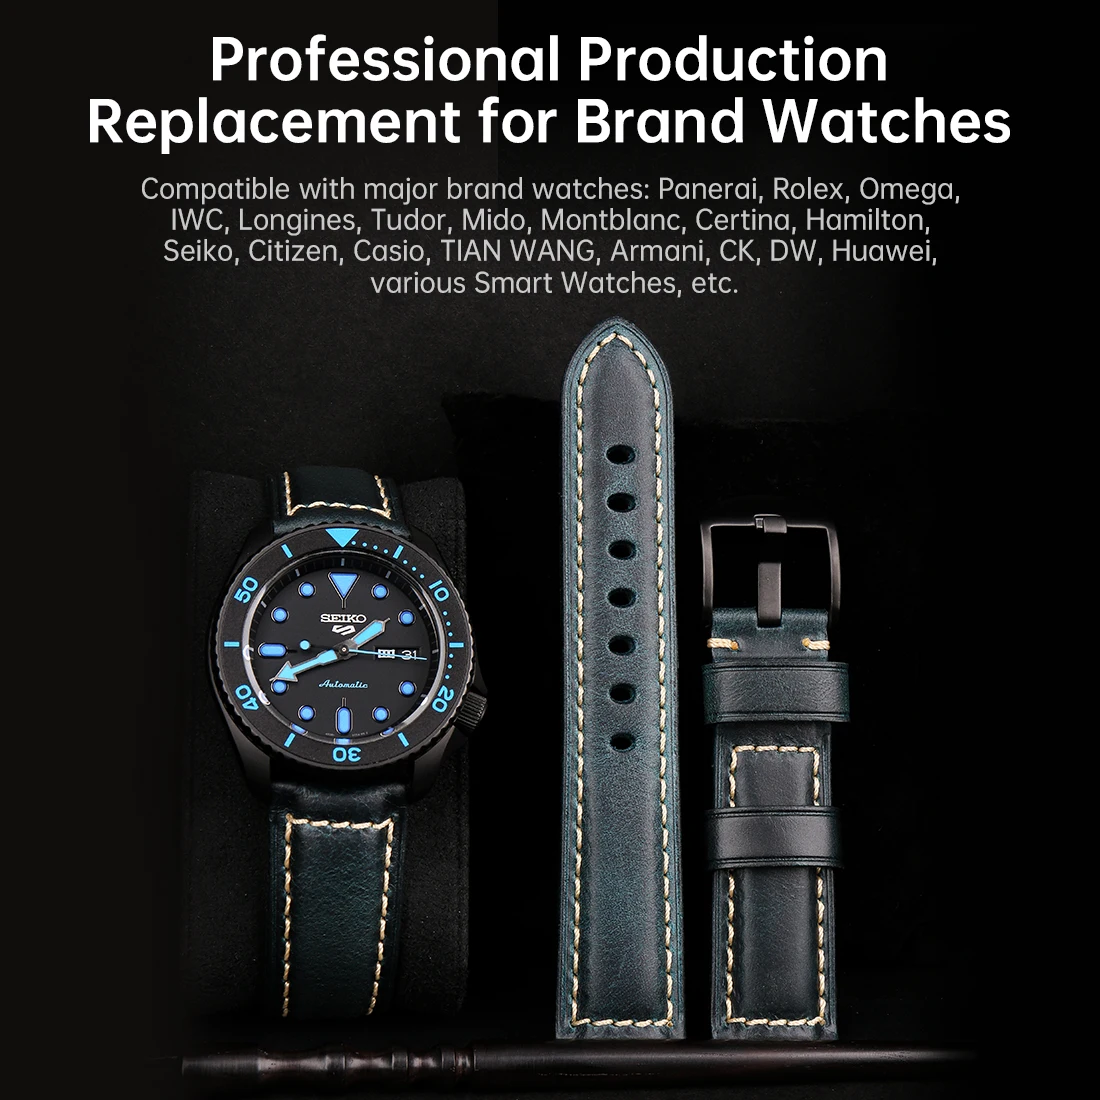 MAIKES Watch Strap Bracelet Watch Accessories 20mm 22mm 24mm Vintage Cow Leather Watch Band For Panerai Fossil Watchband 4